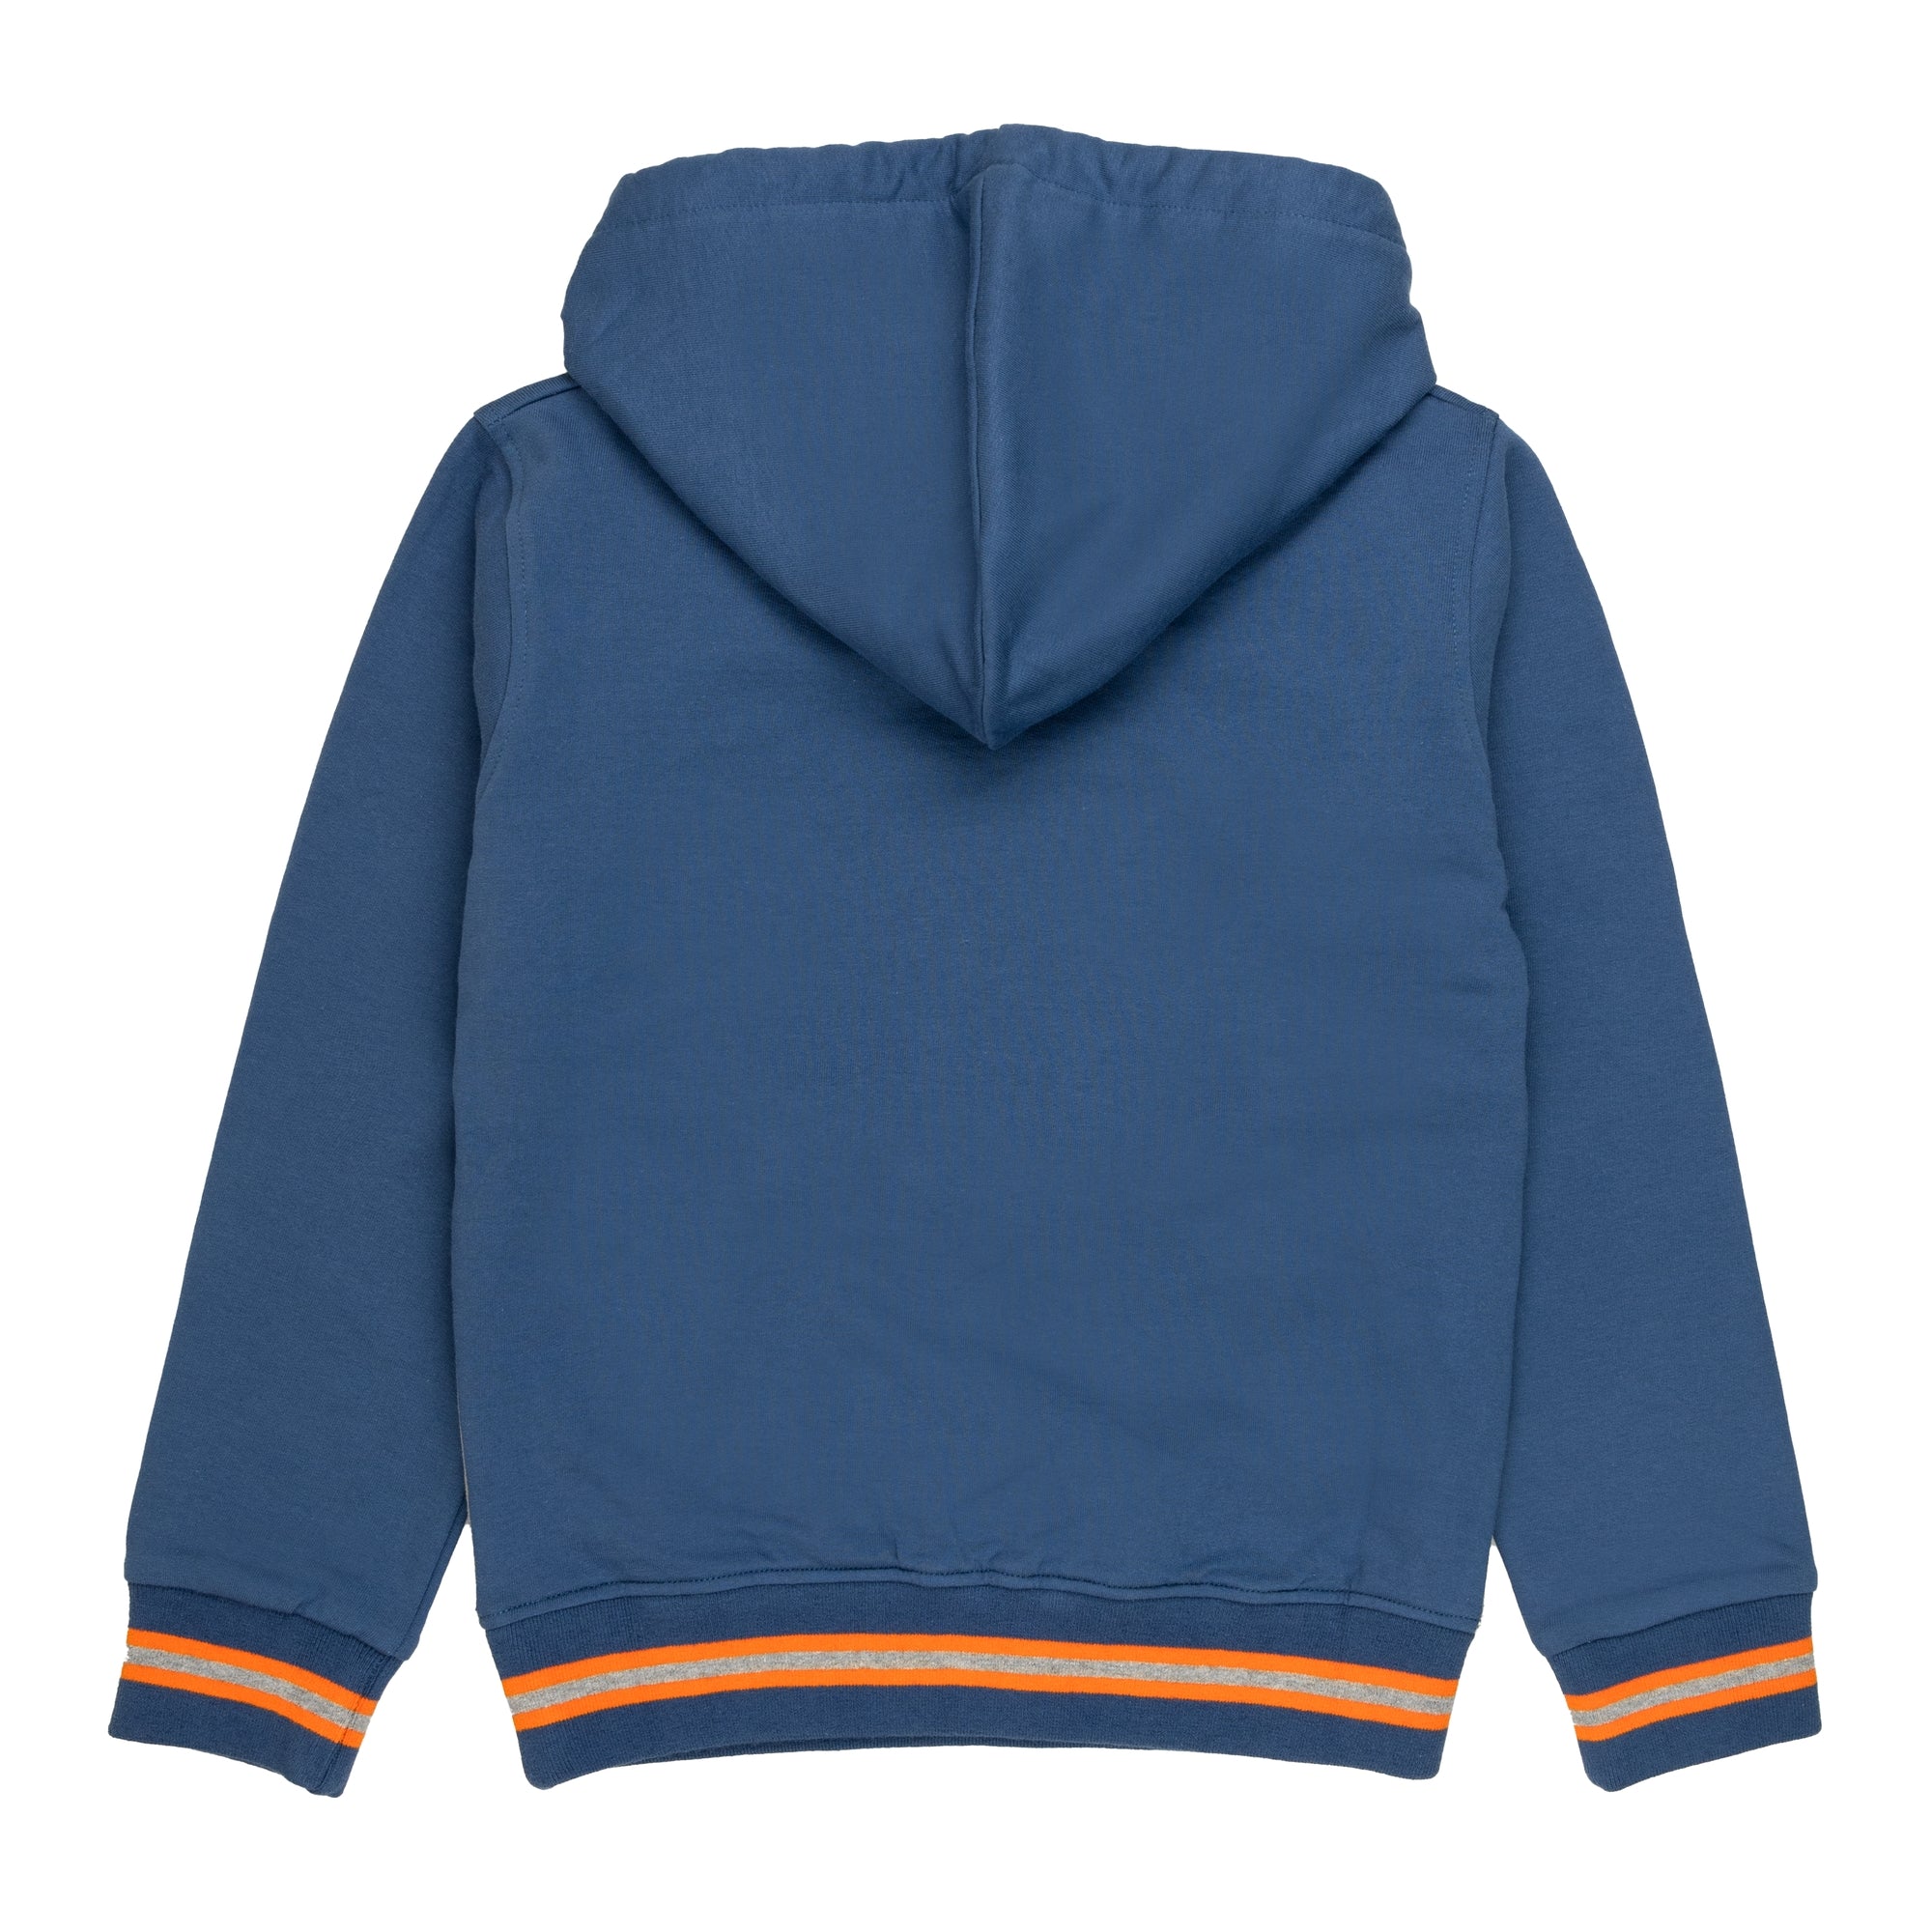 Two-tone hooded sweatshirt with inside brushed printed logo